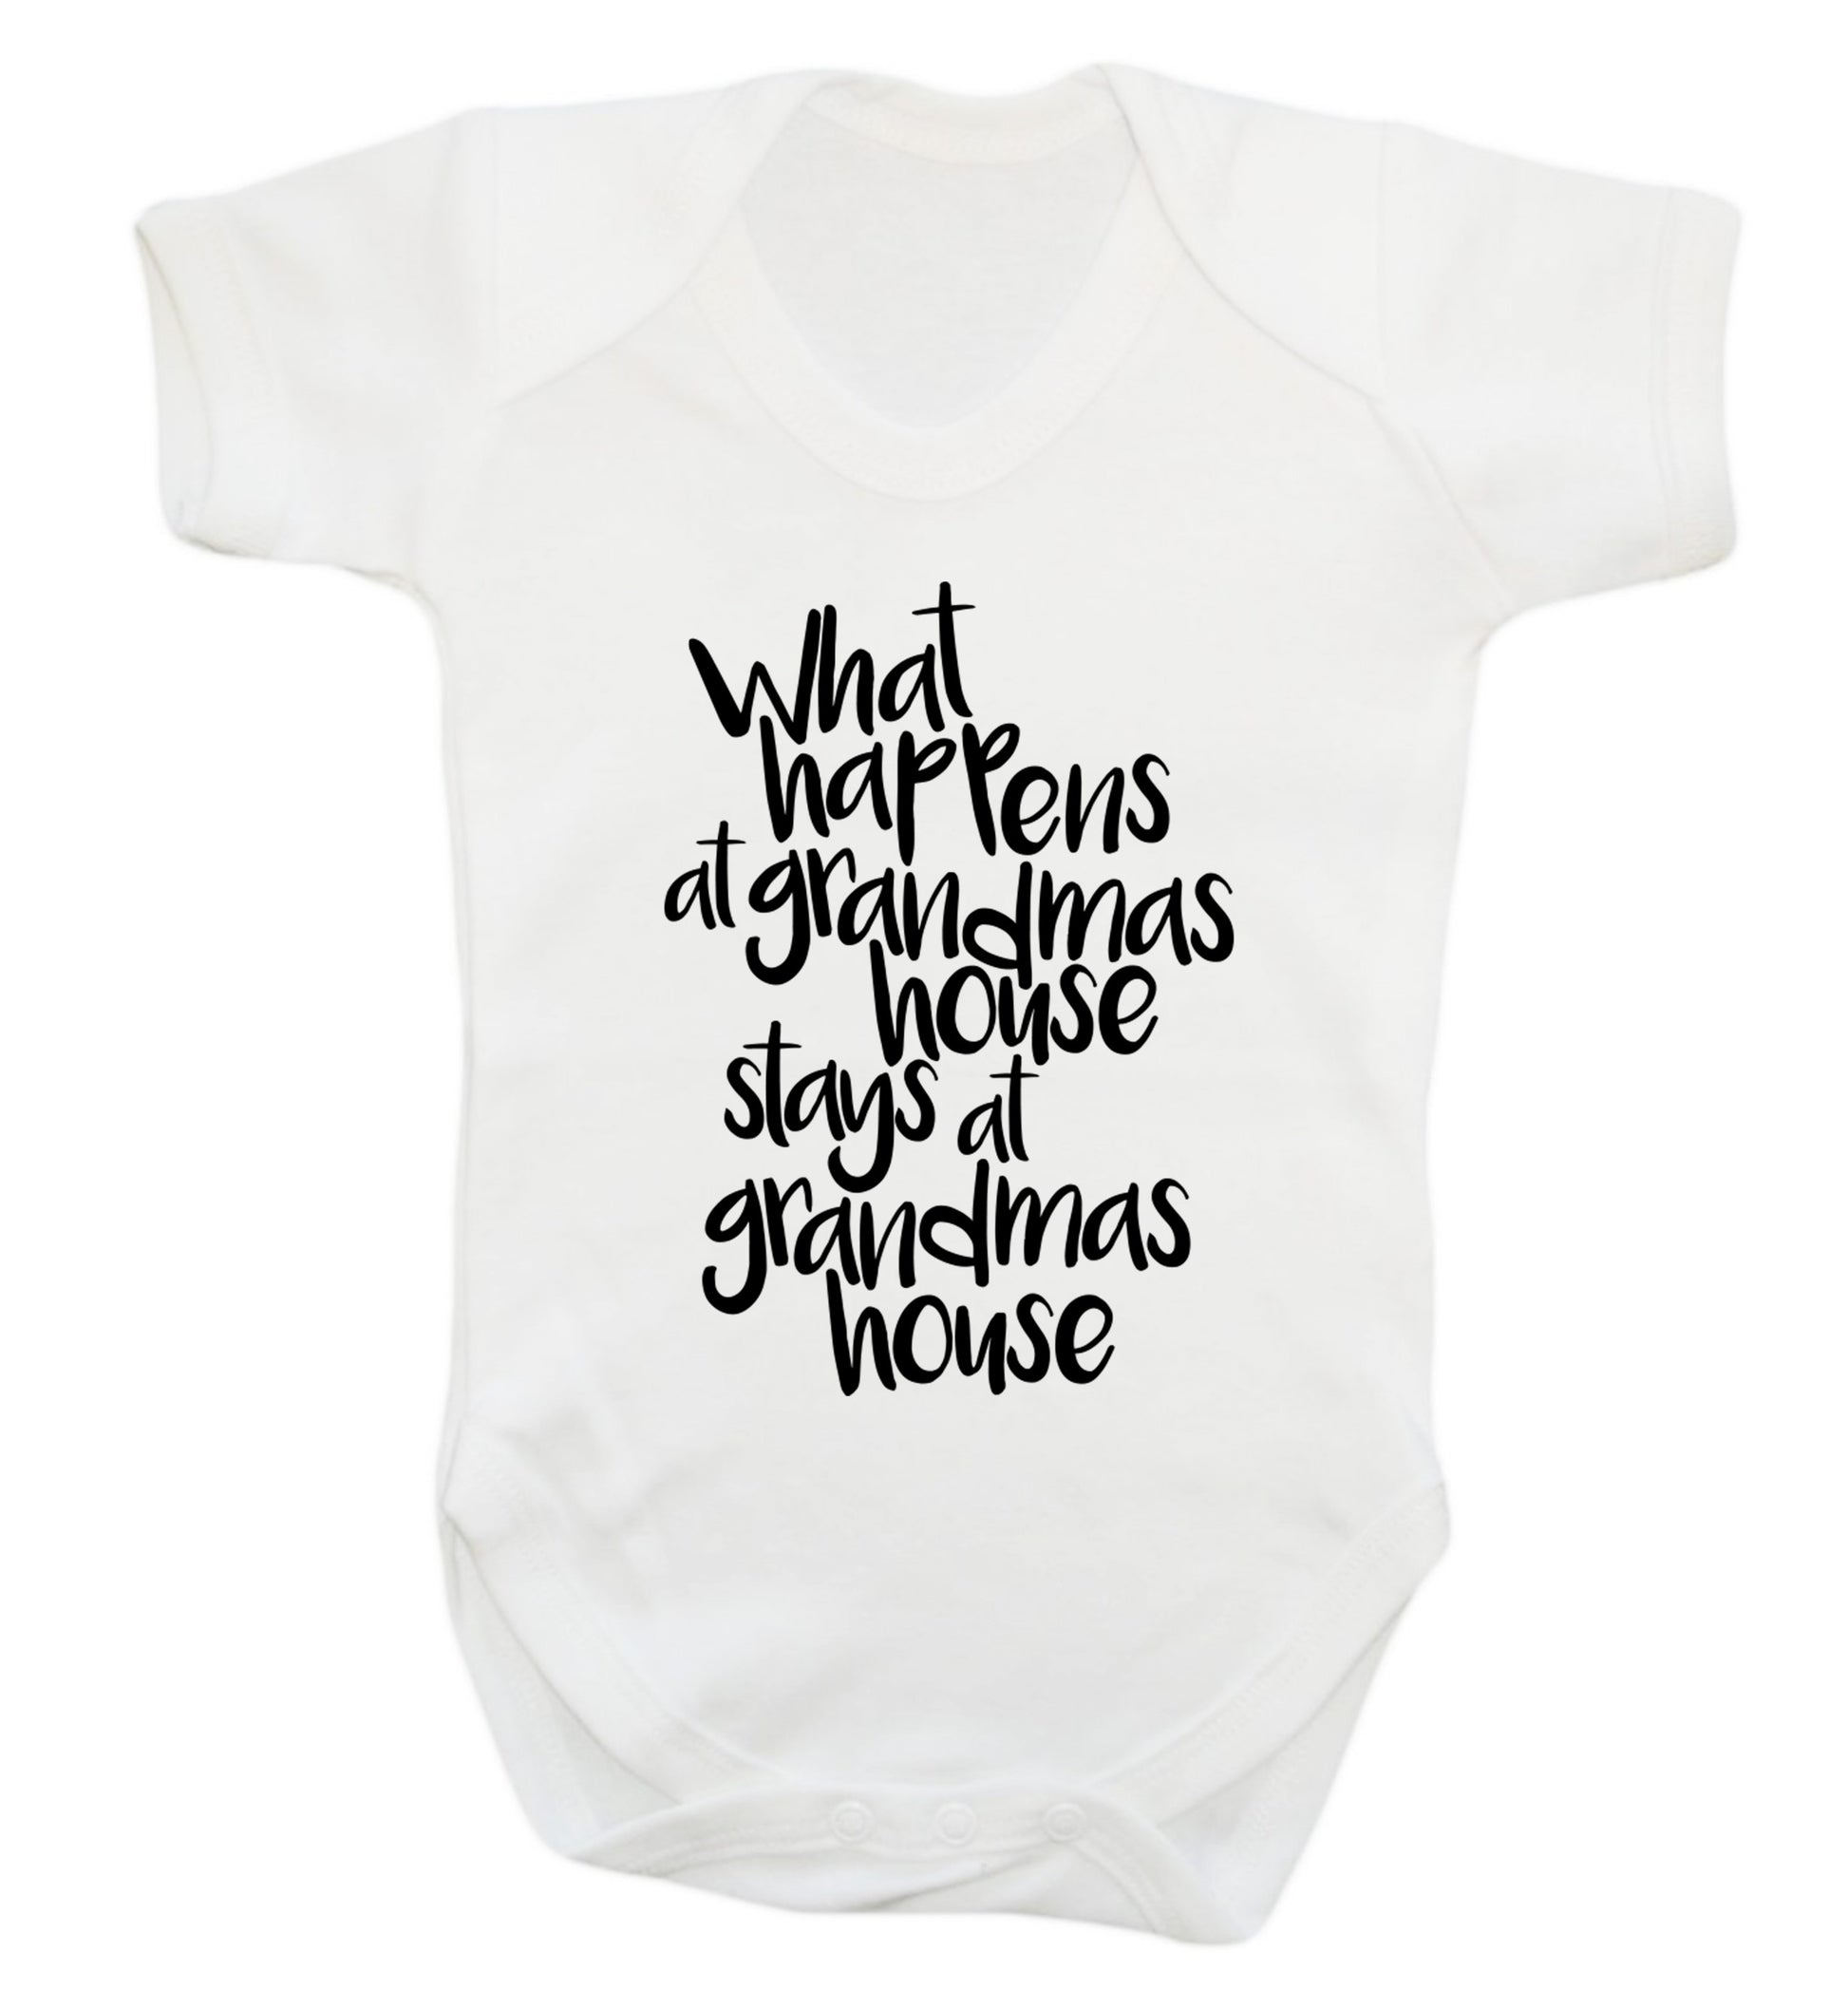 What happens at grandmas house stays at grandmas house Baby Vest white 18-24 months